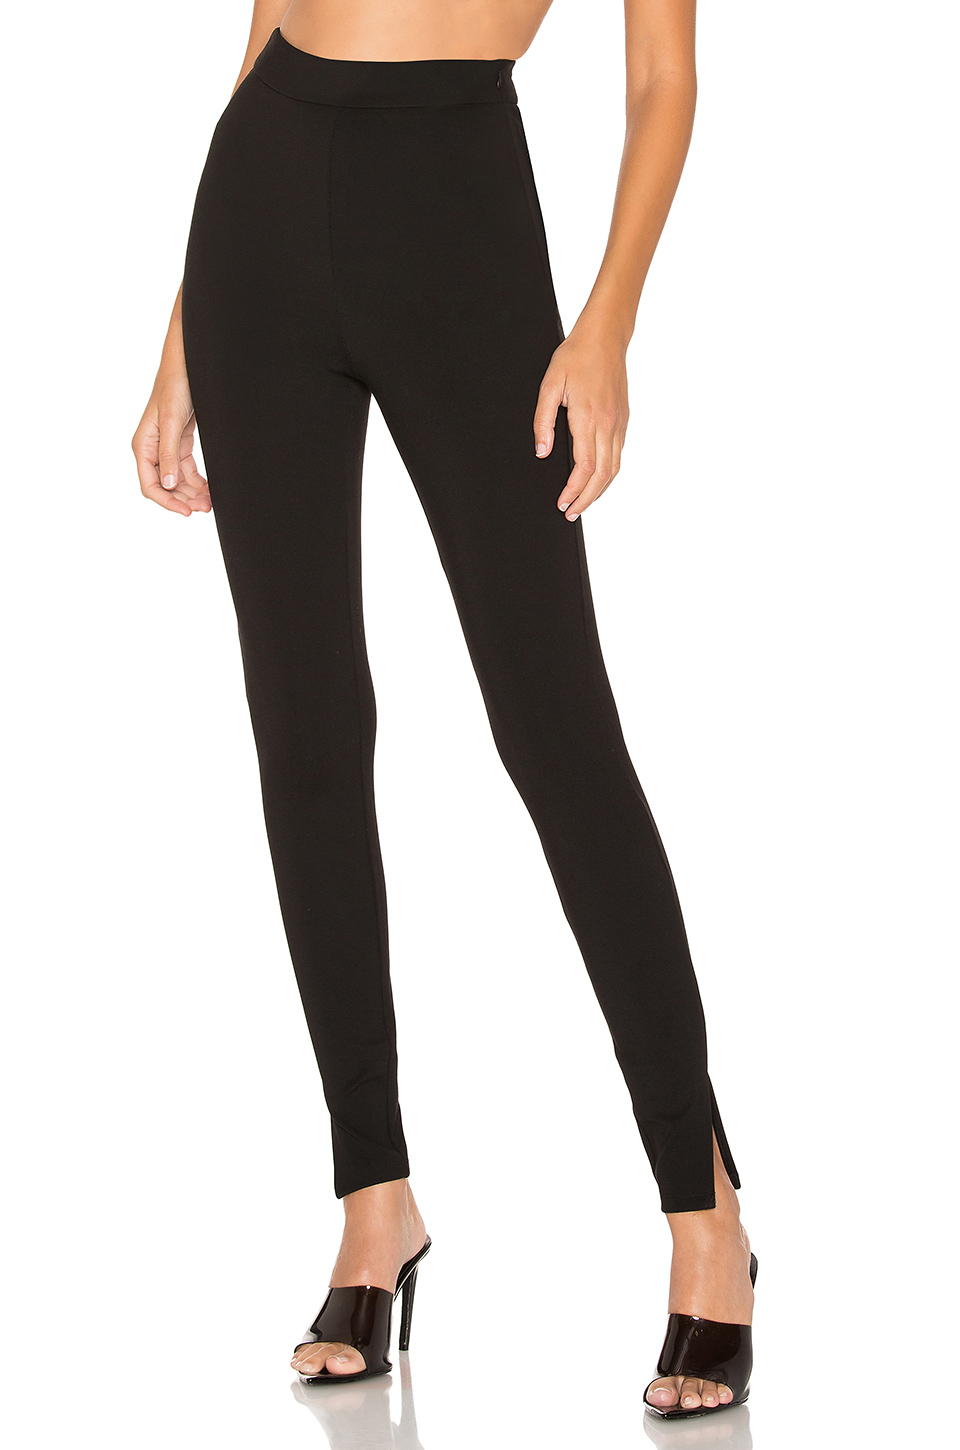 We Love These Stylish superdown Leggings You Can Wear as Pants | Us Weekly